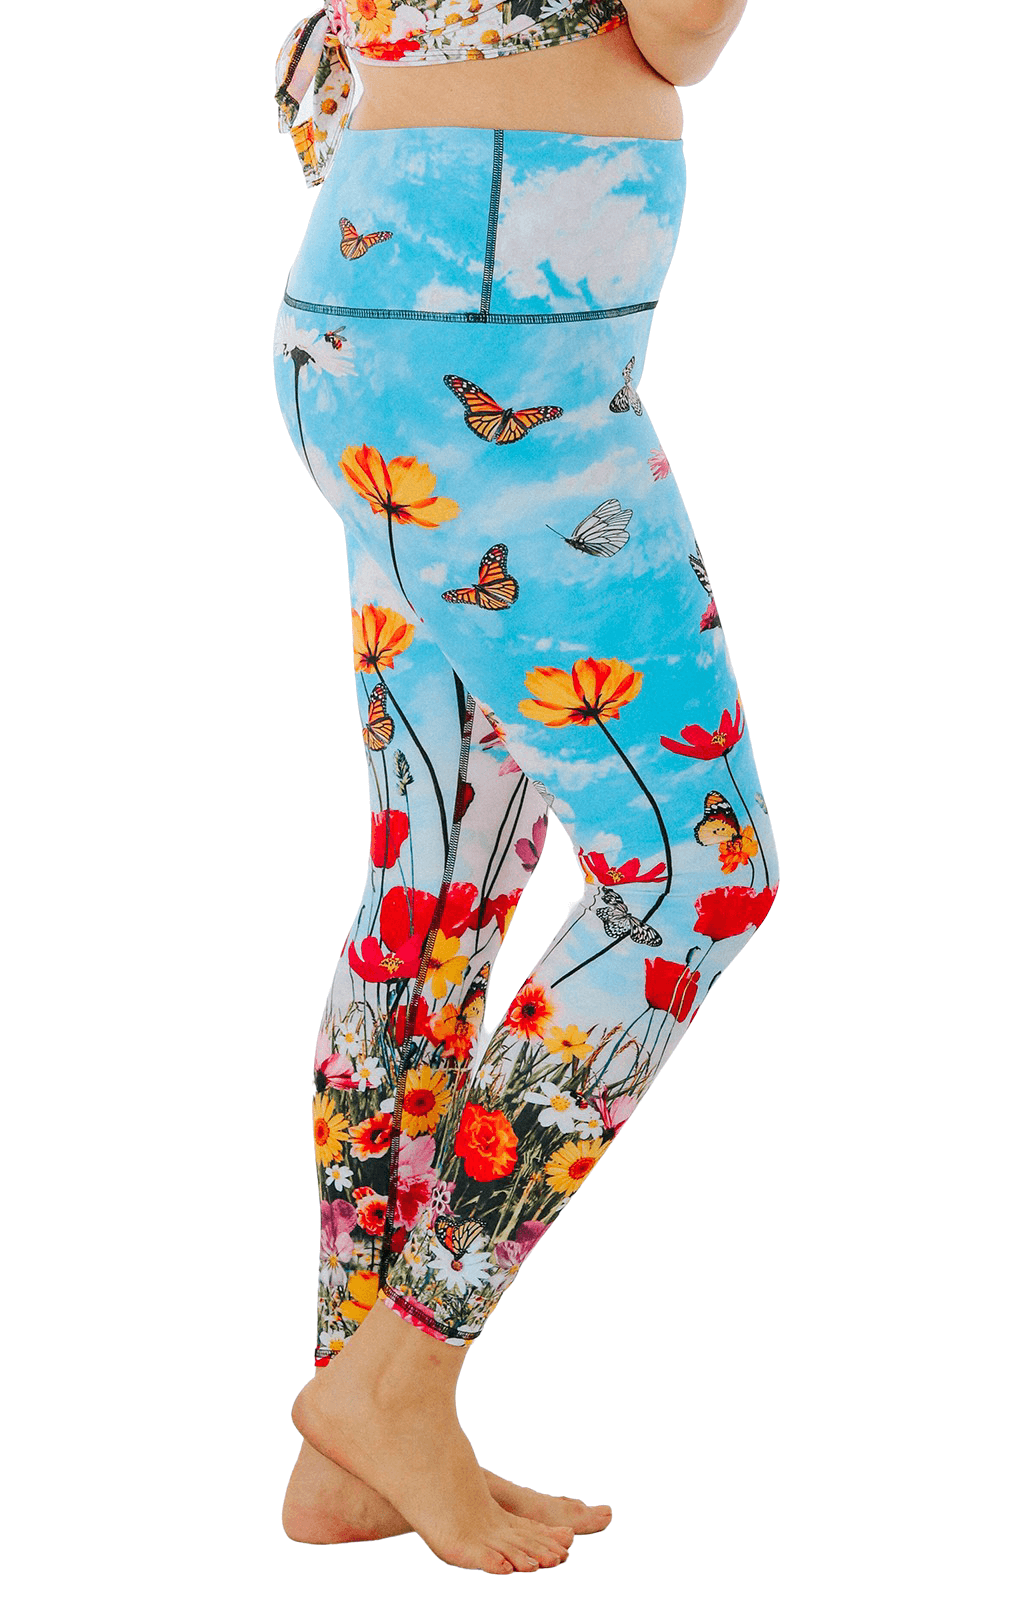 Mossimo Supply Co. Women's Floral Print Workout Yoga Legging Pants